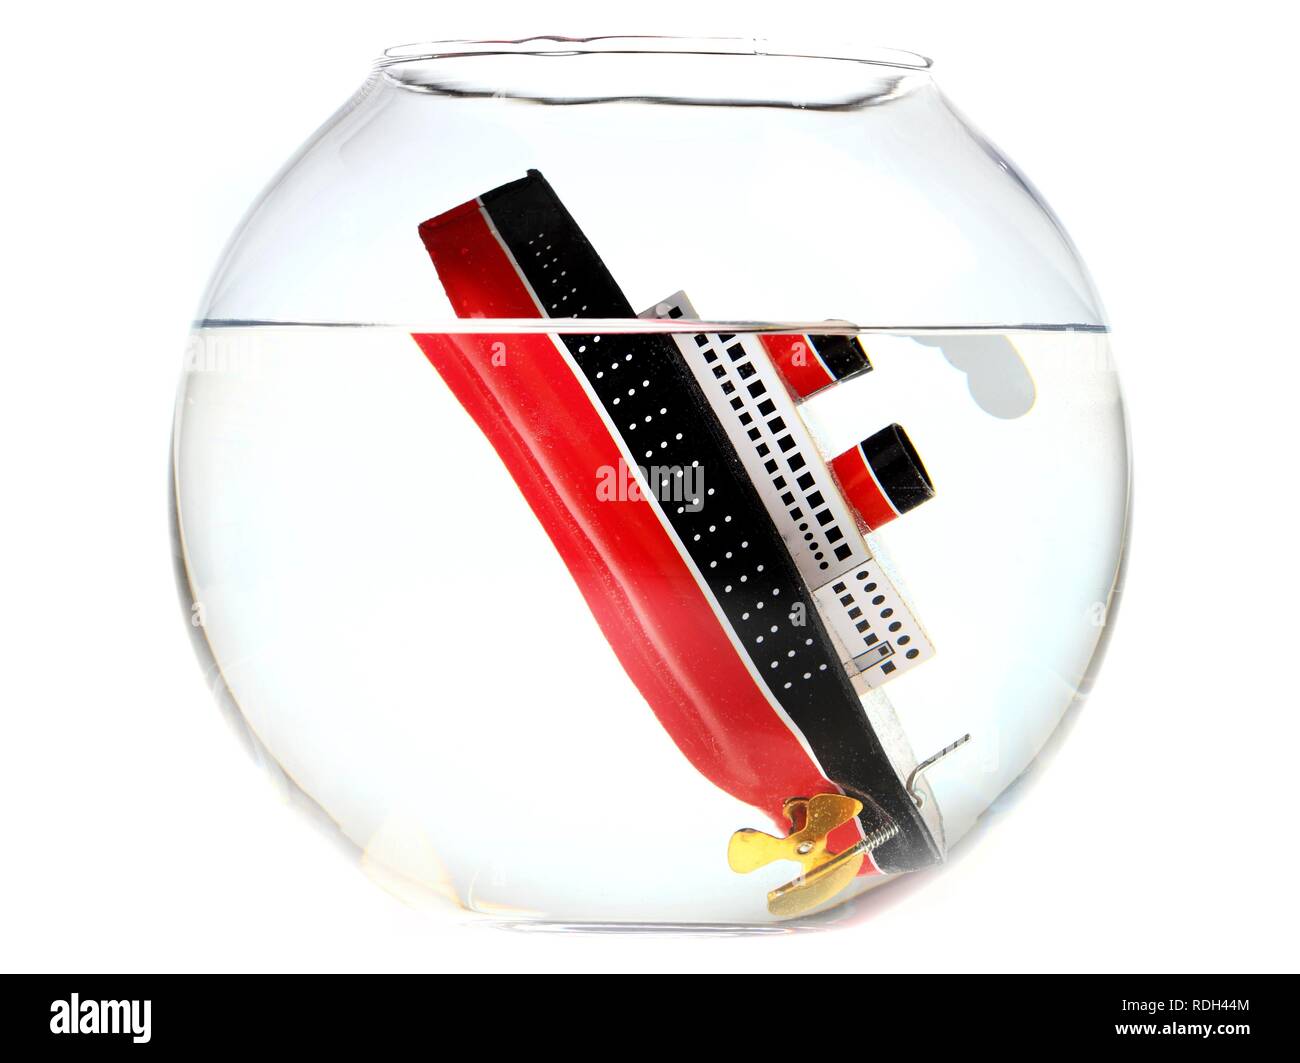 Sunken toy cruise ship in a fish bowl, illustration Stock Photo